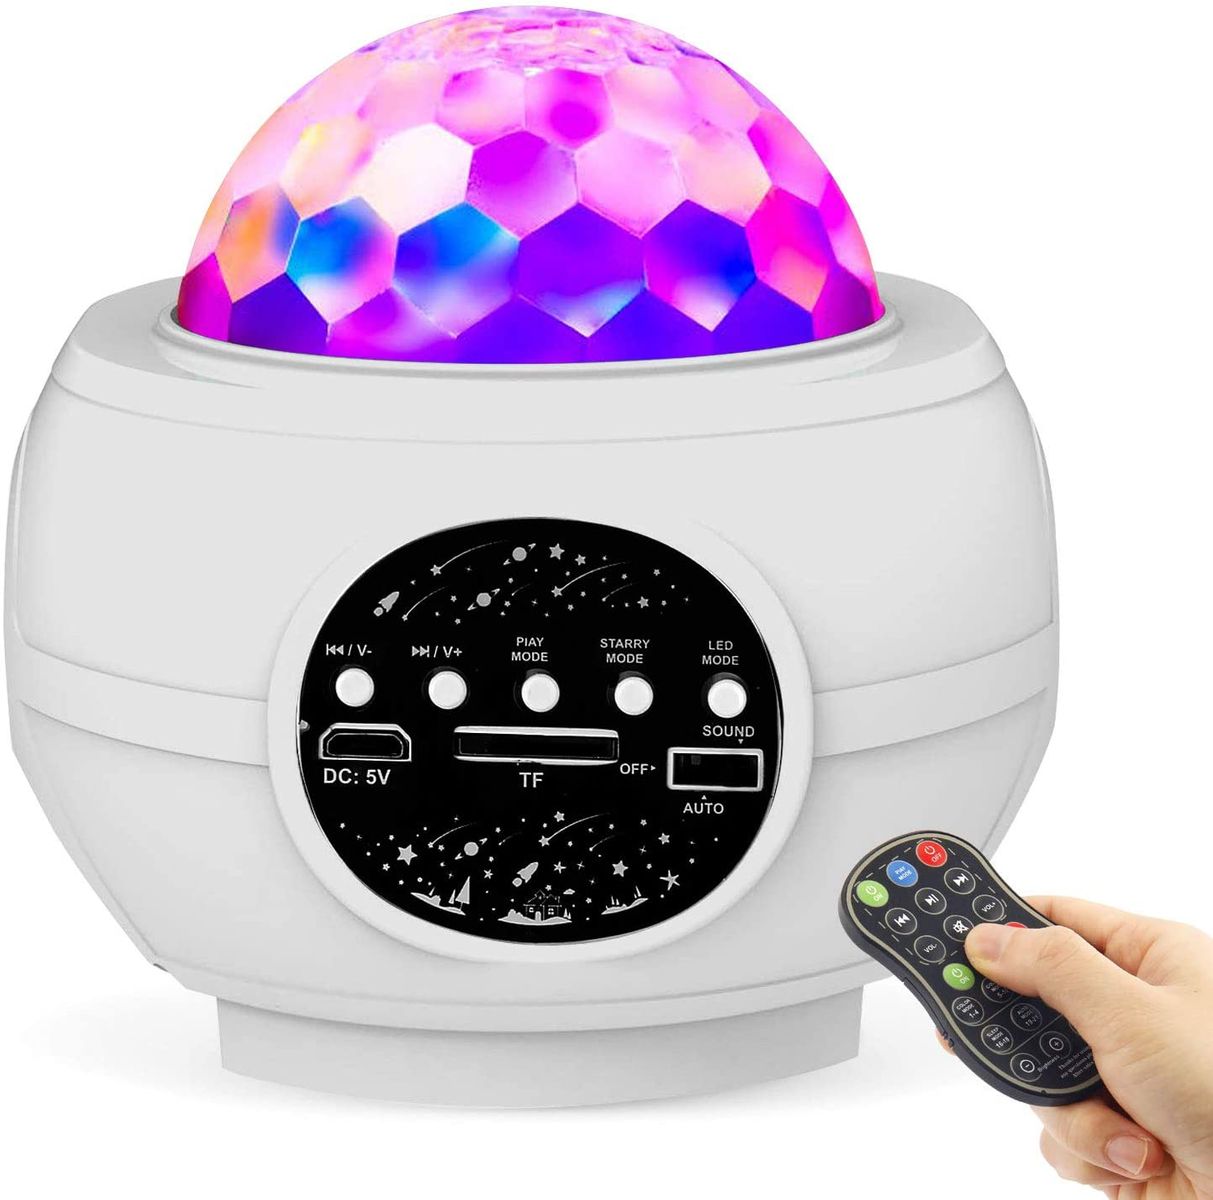 UBEGOOD Starry Sky Projector, Starlight Projector Lamp LED Water Waves Projector Light Bluetooth Music Projector Night Light with Remote Control and Timer, for Baby Bedroom, Party, Christmas